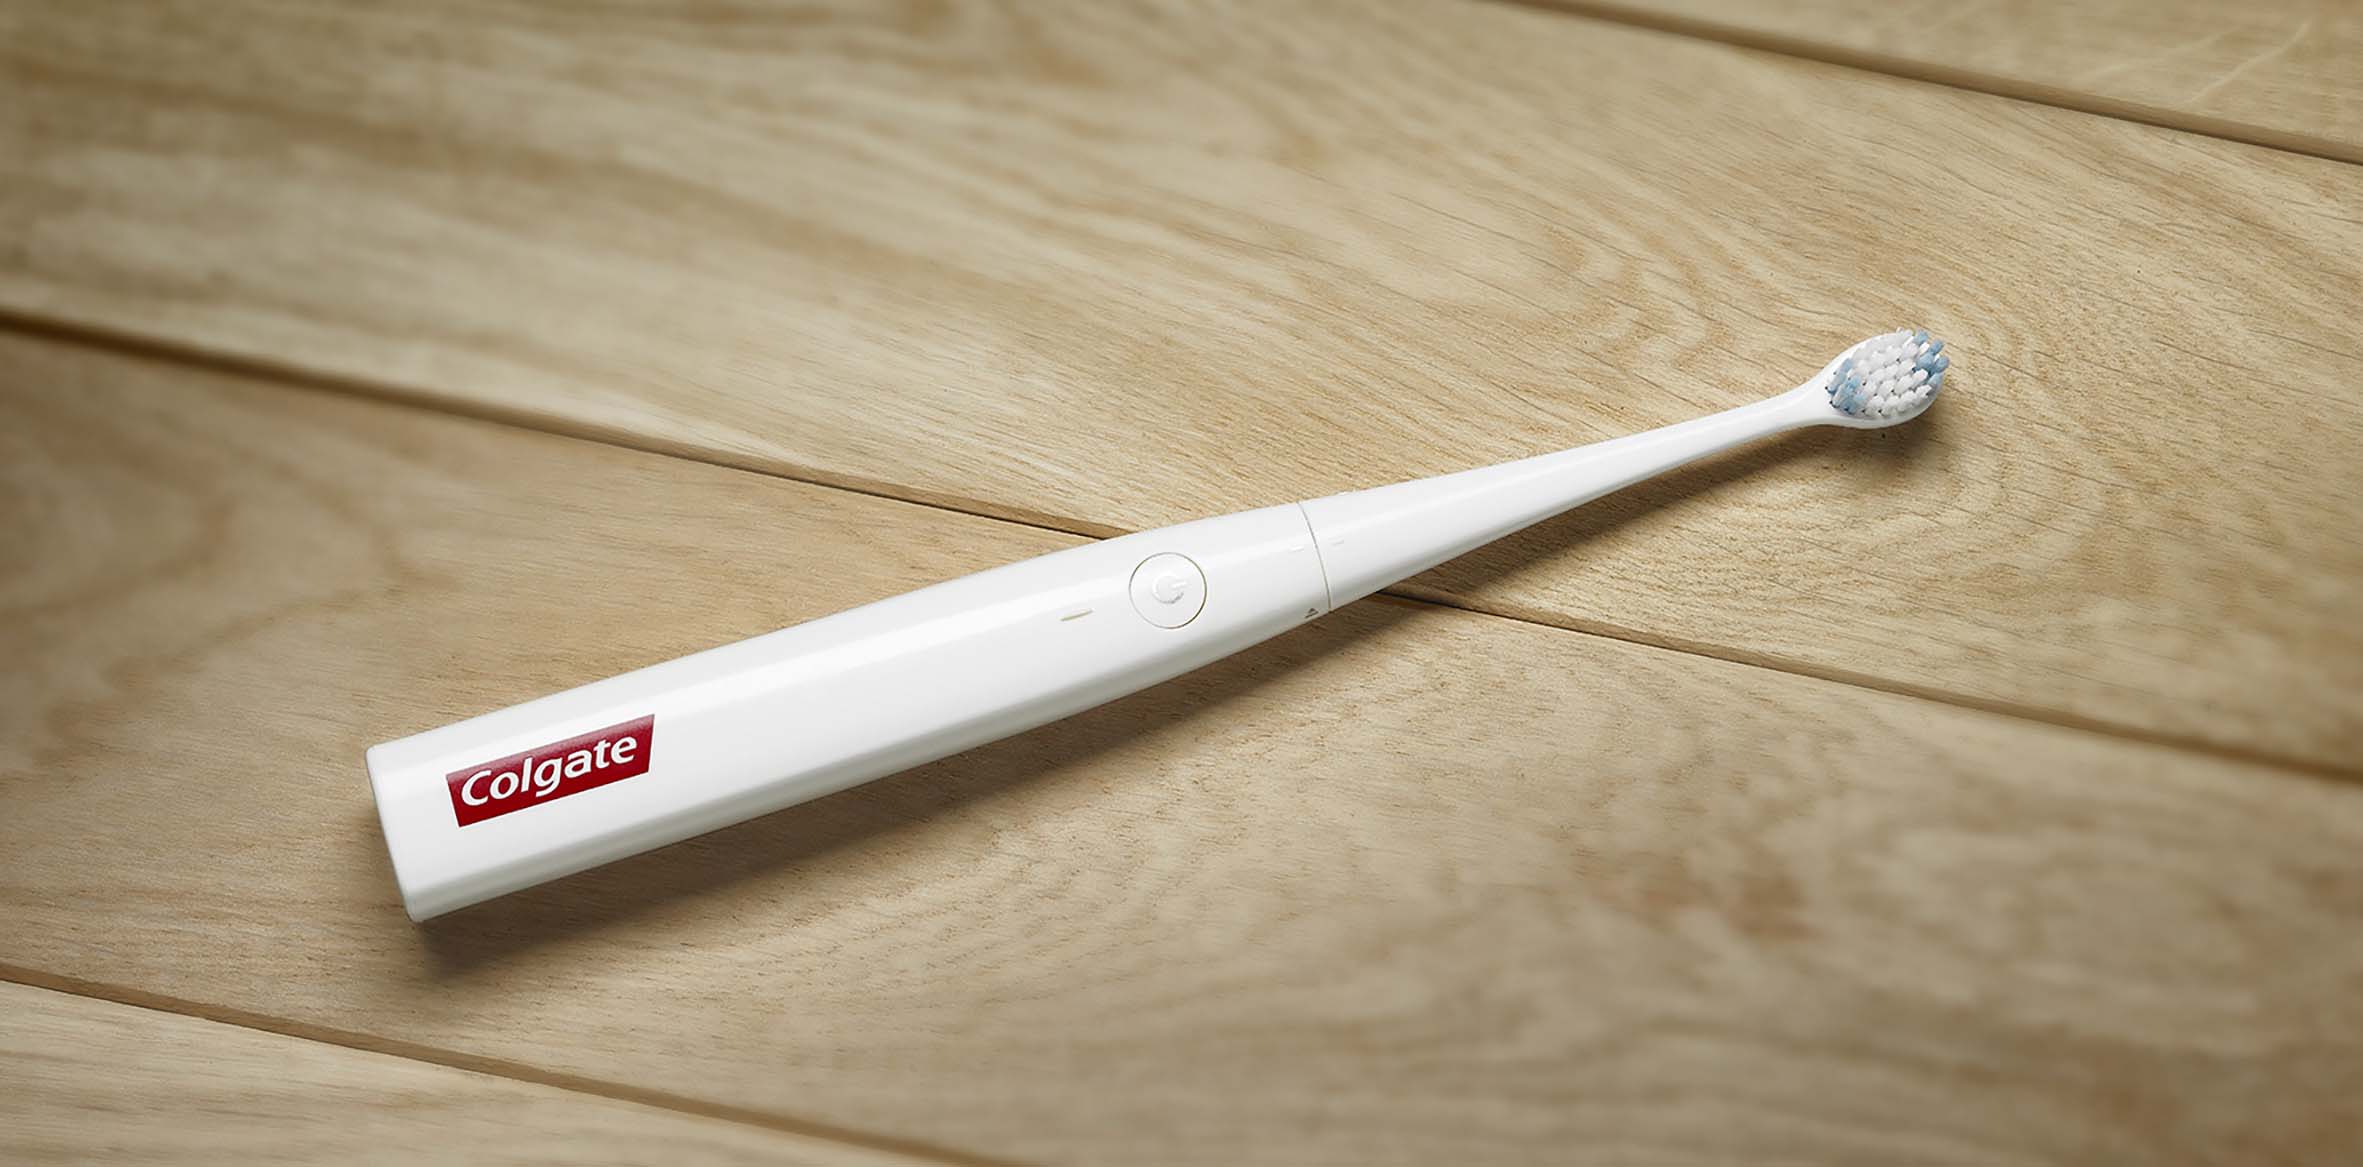 Colgate® Smart Electronic Toothbrush E1 with Artificial Intelligence